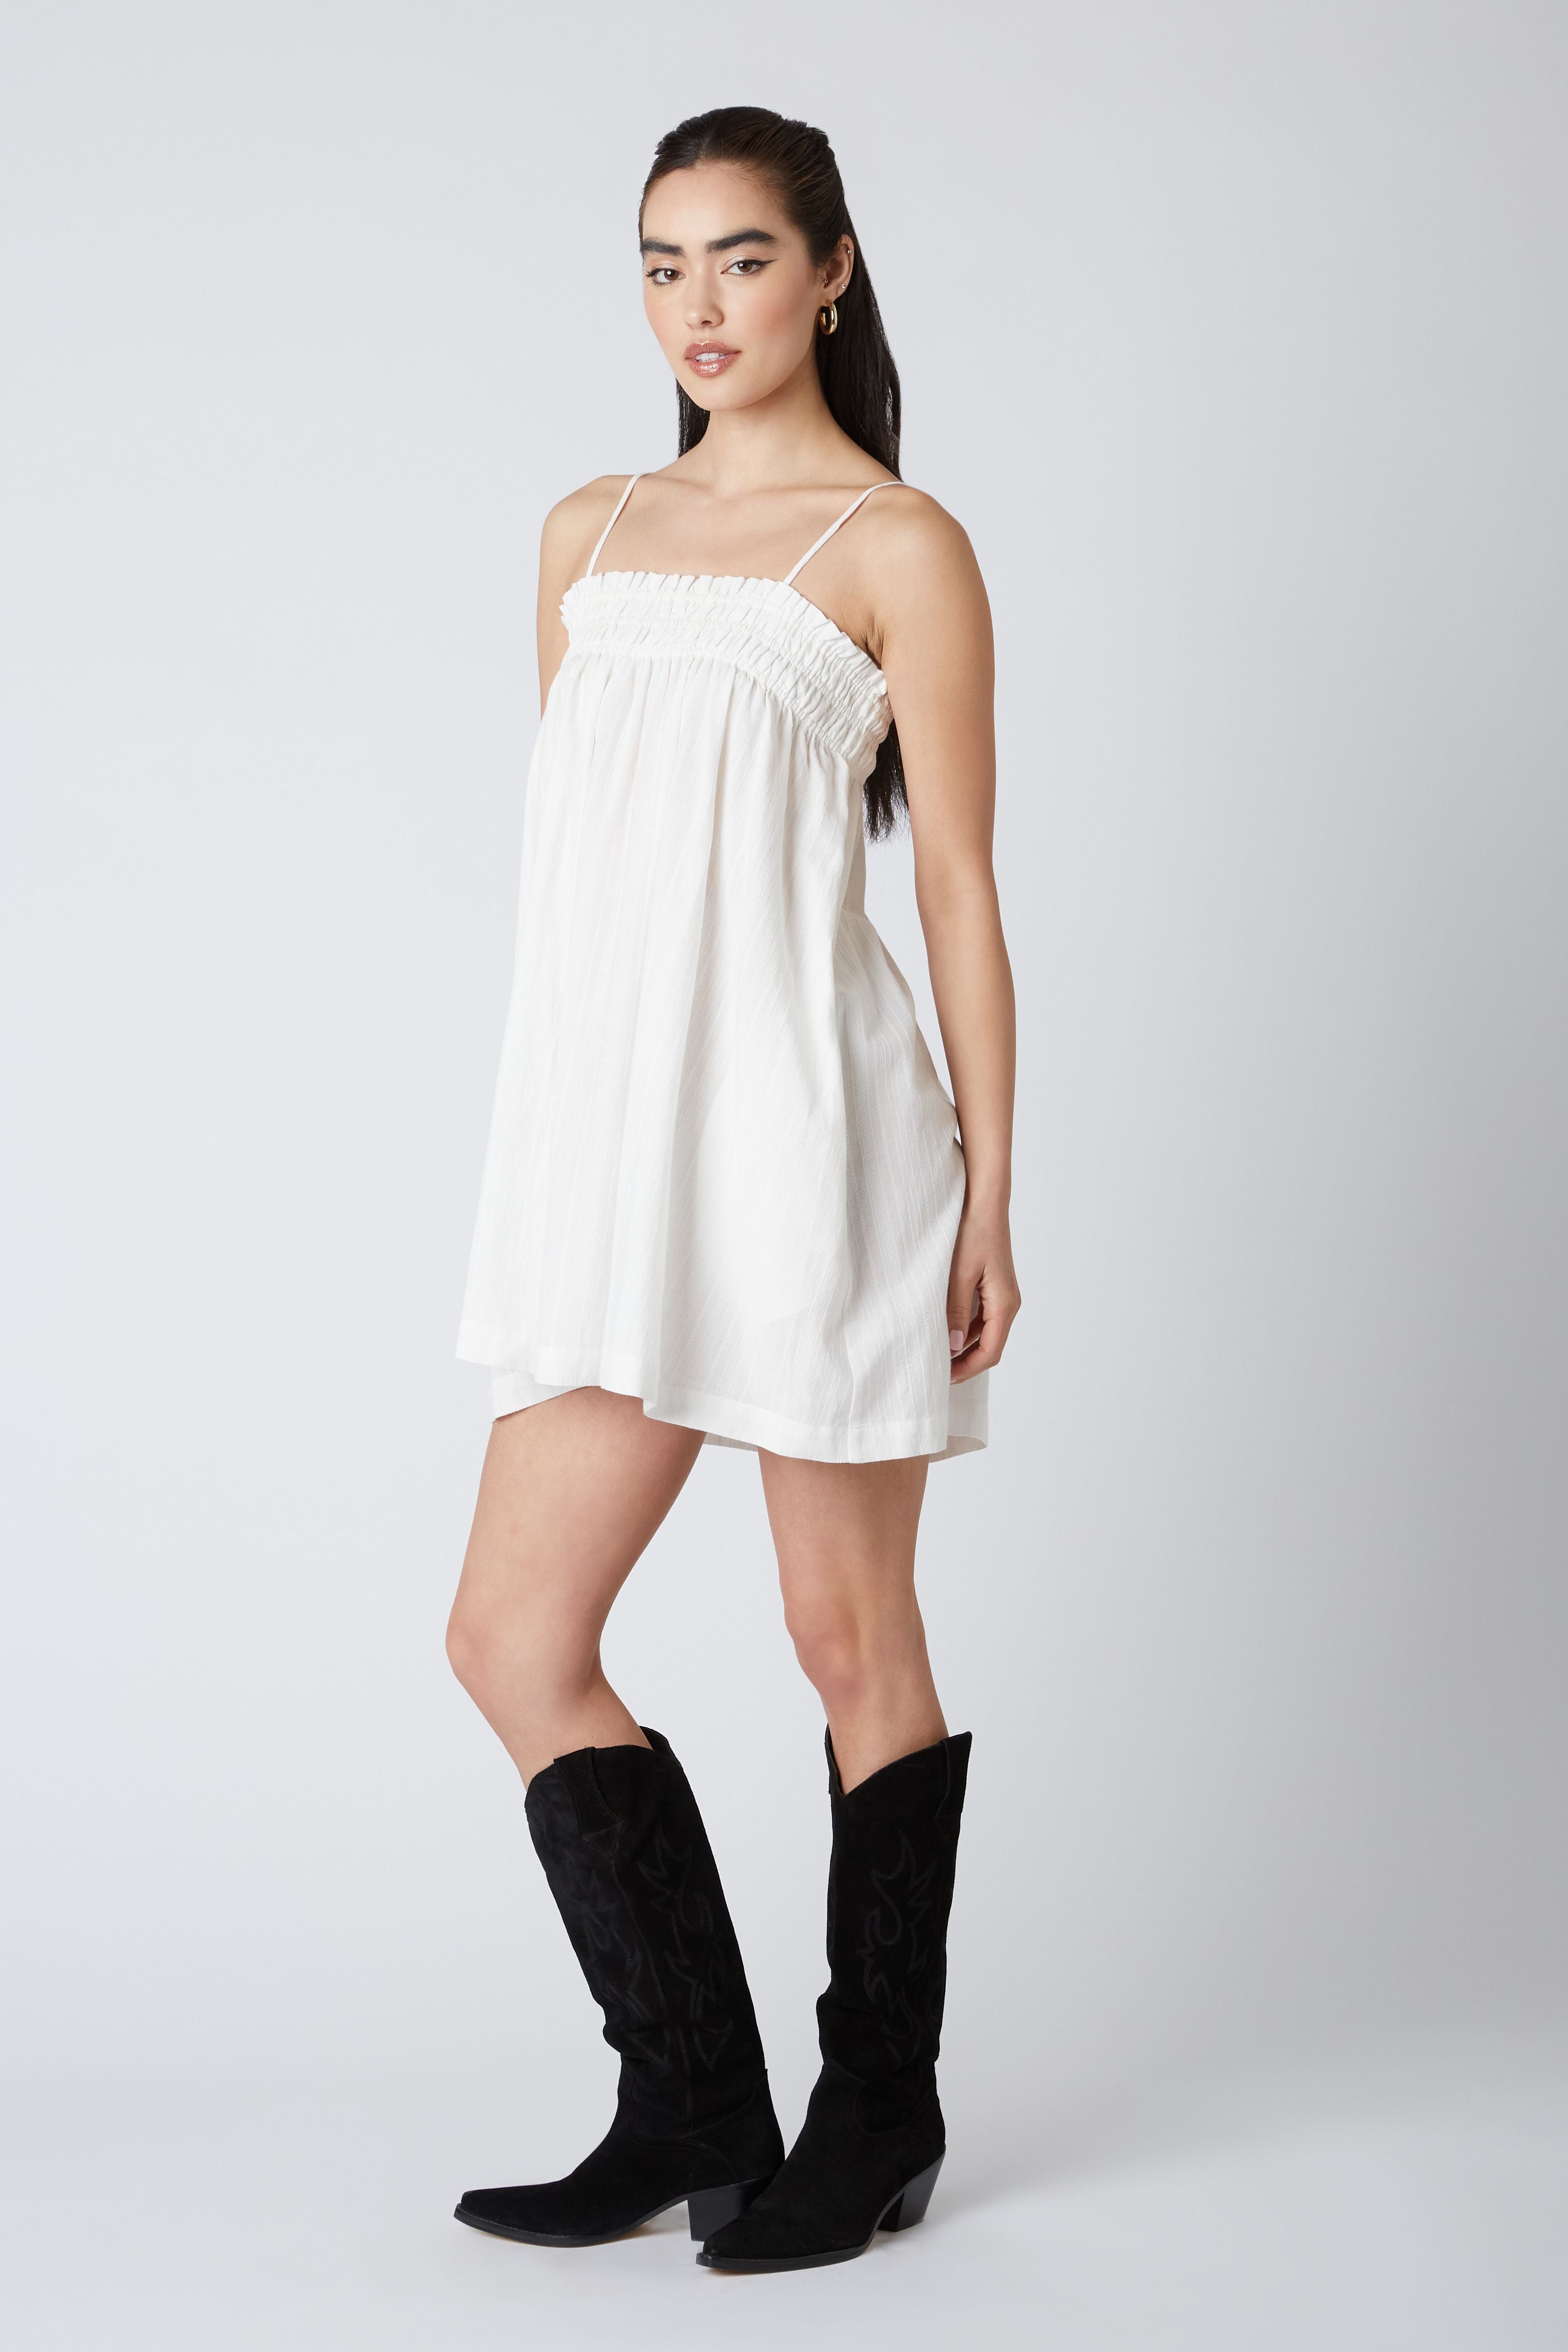 Square Neck Shift Dress in White Side View